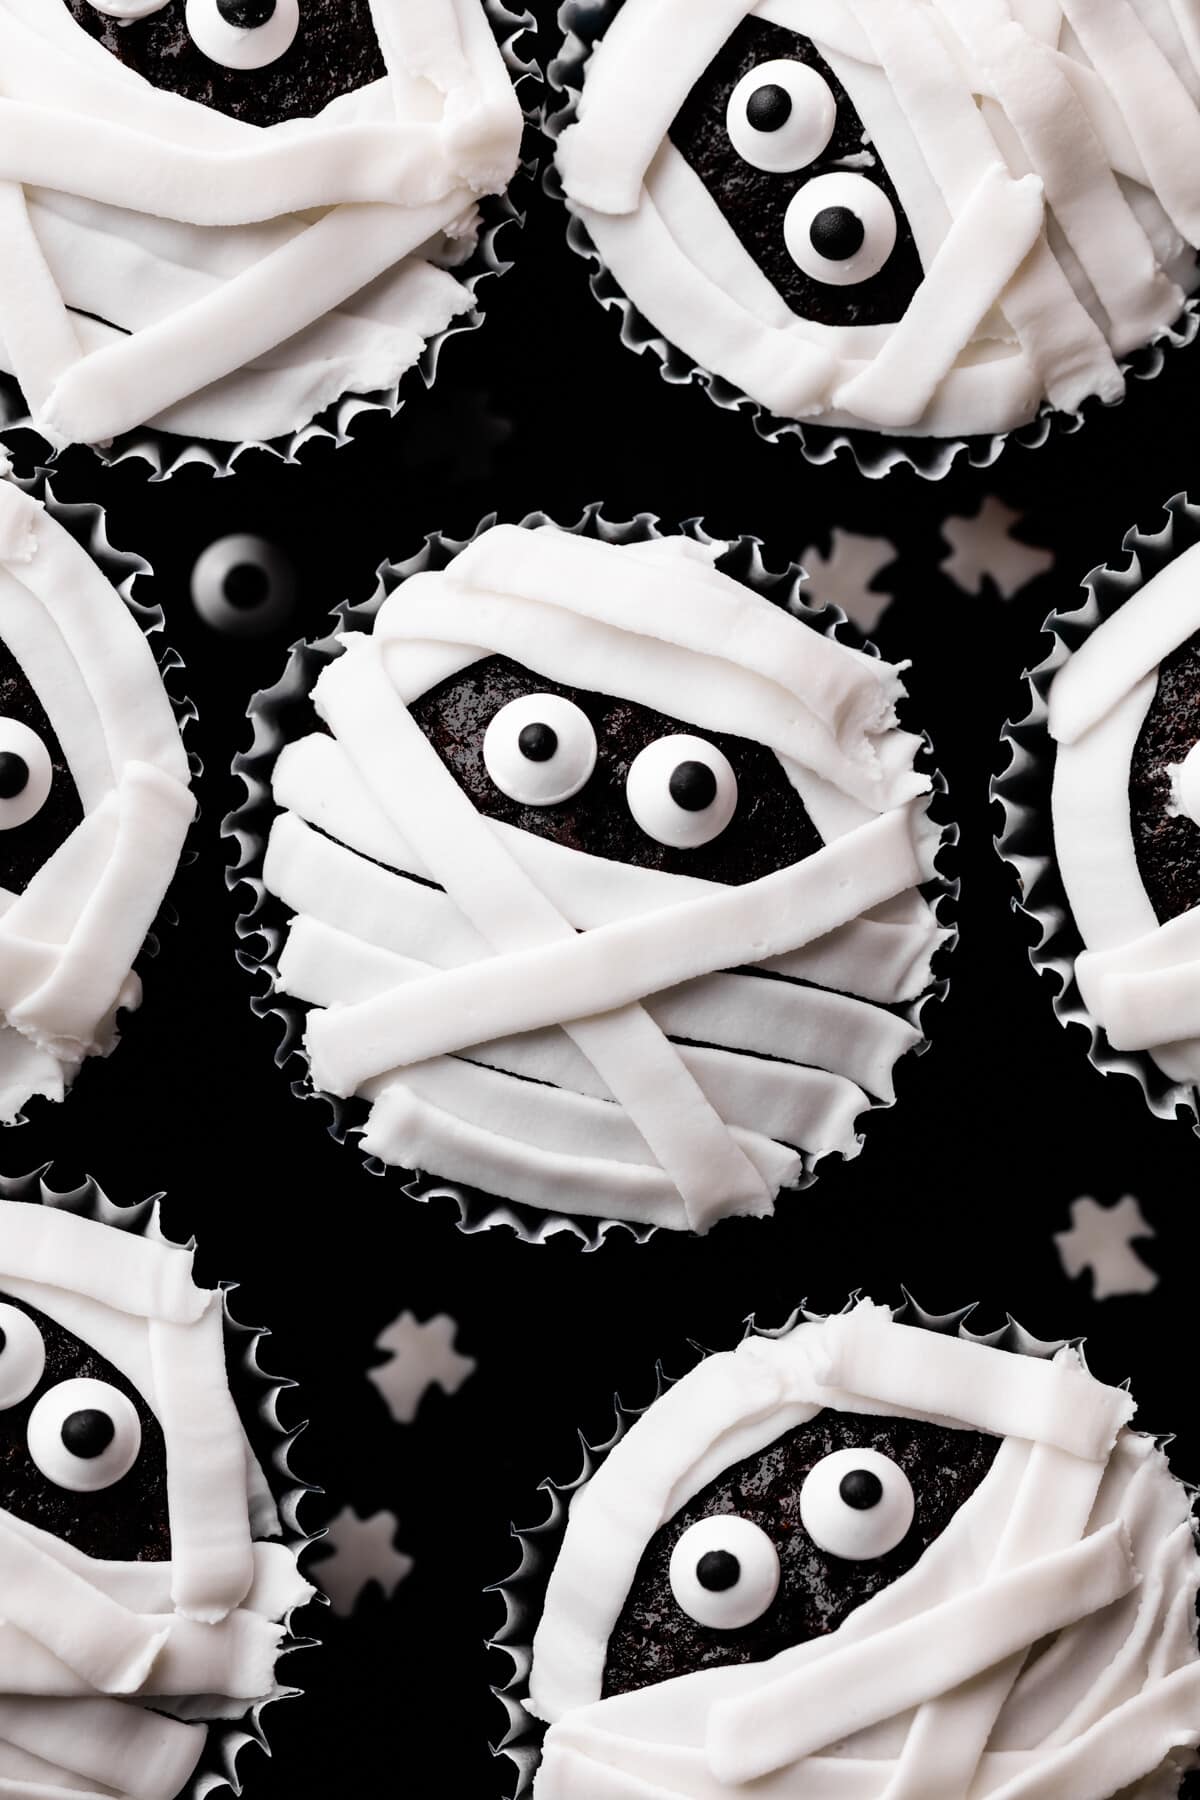 Black and white Mummy decorated cupcakes.